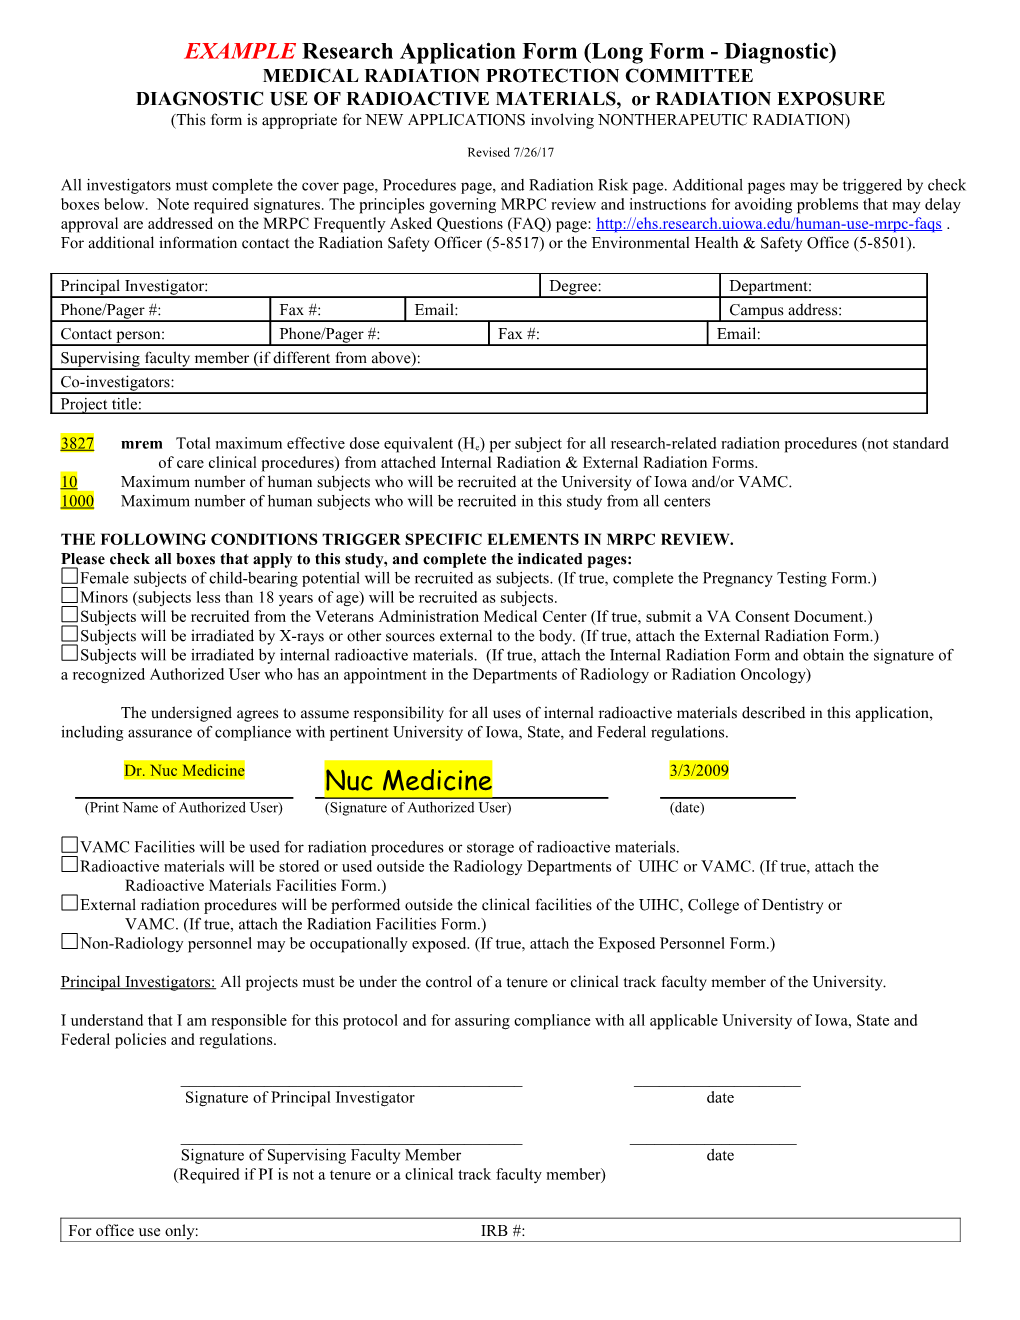 EXAMPLE Research Application Form (Long Form - Diagnostic)